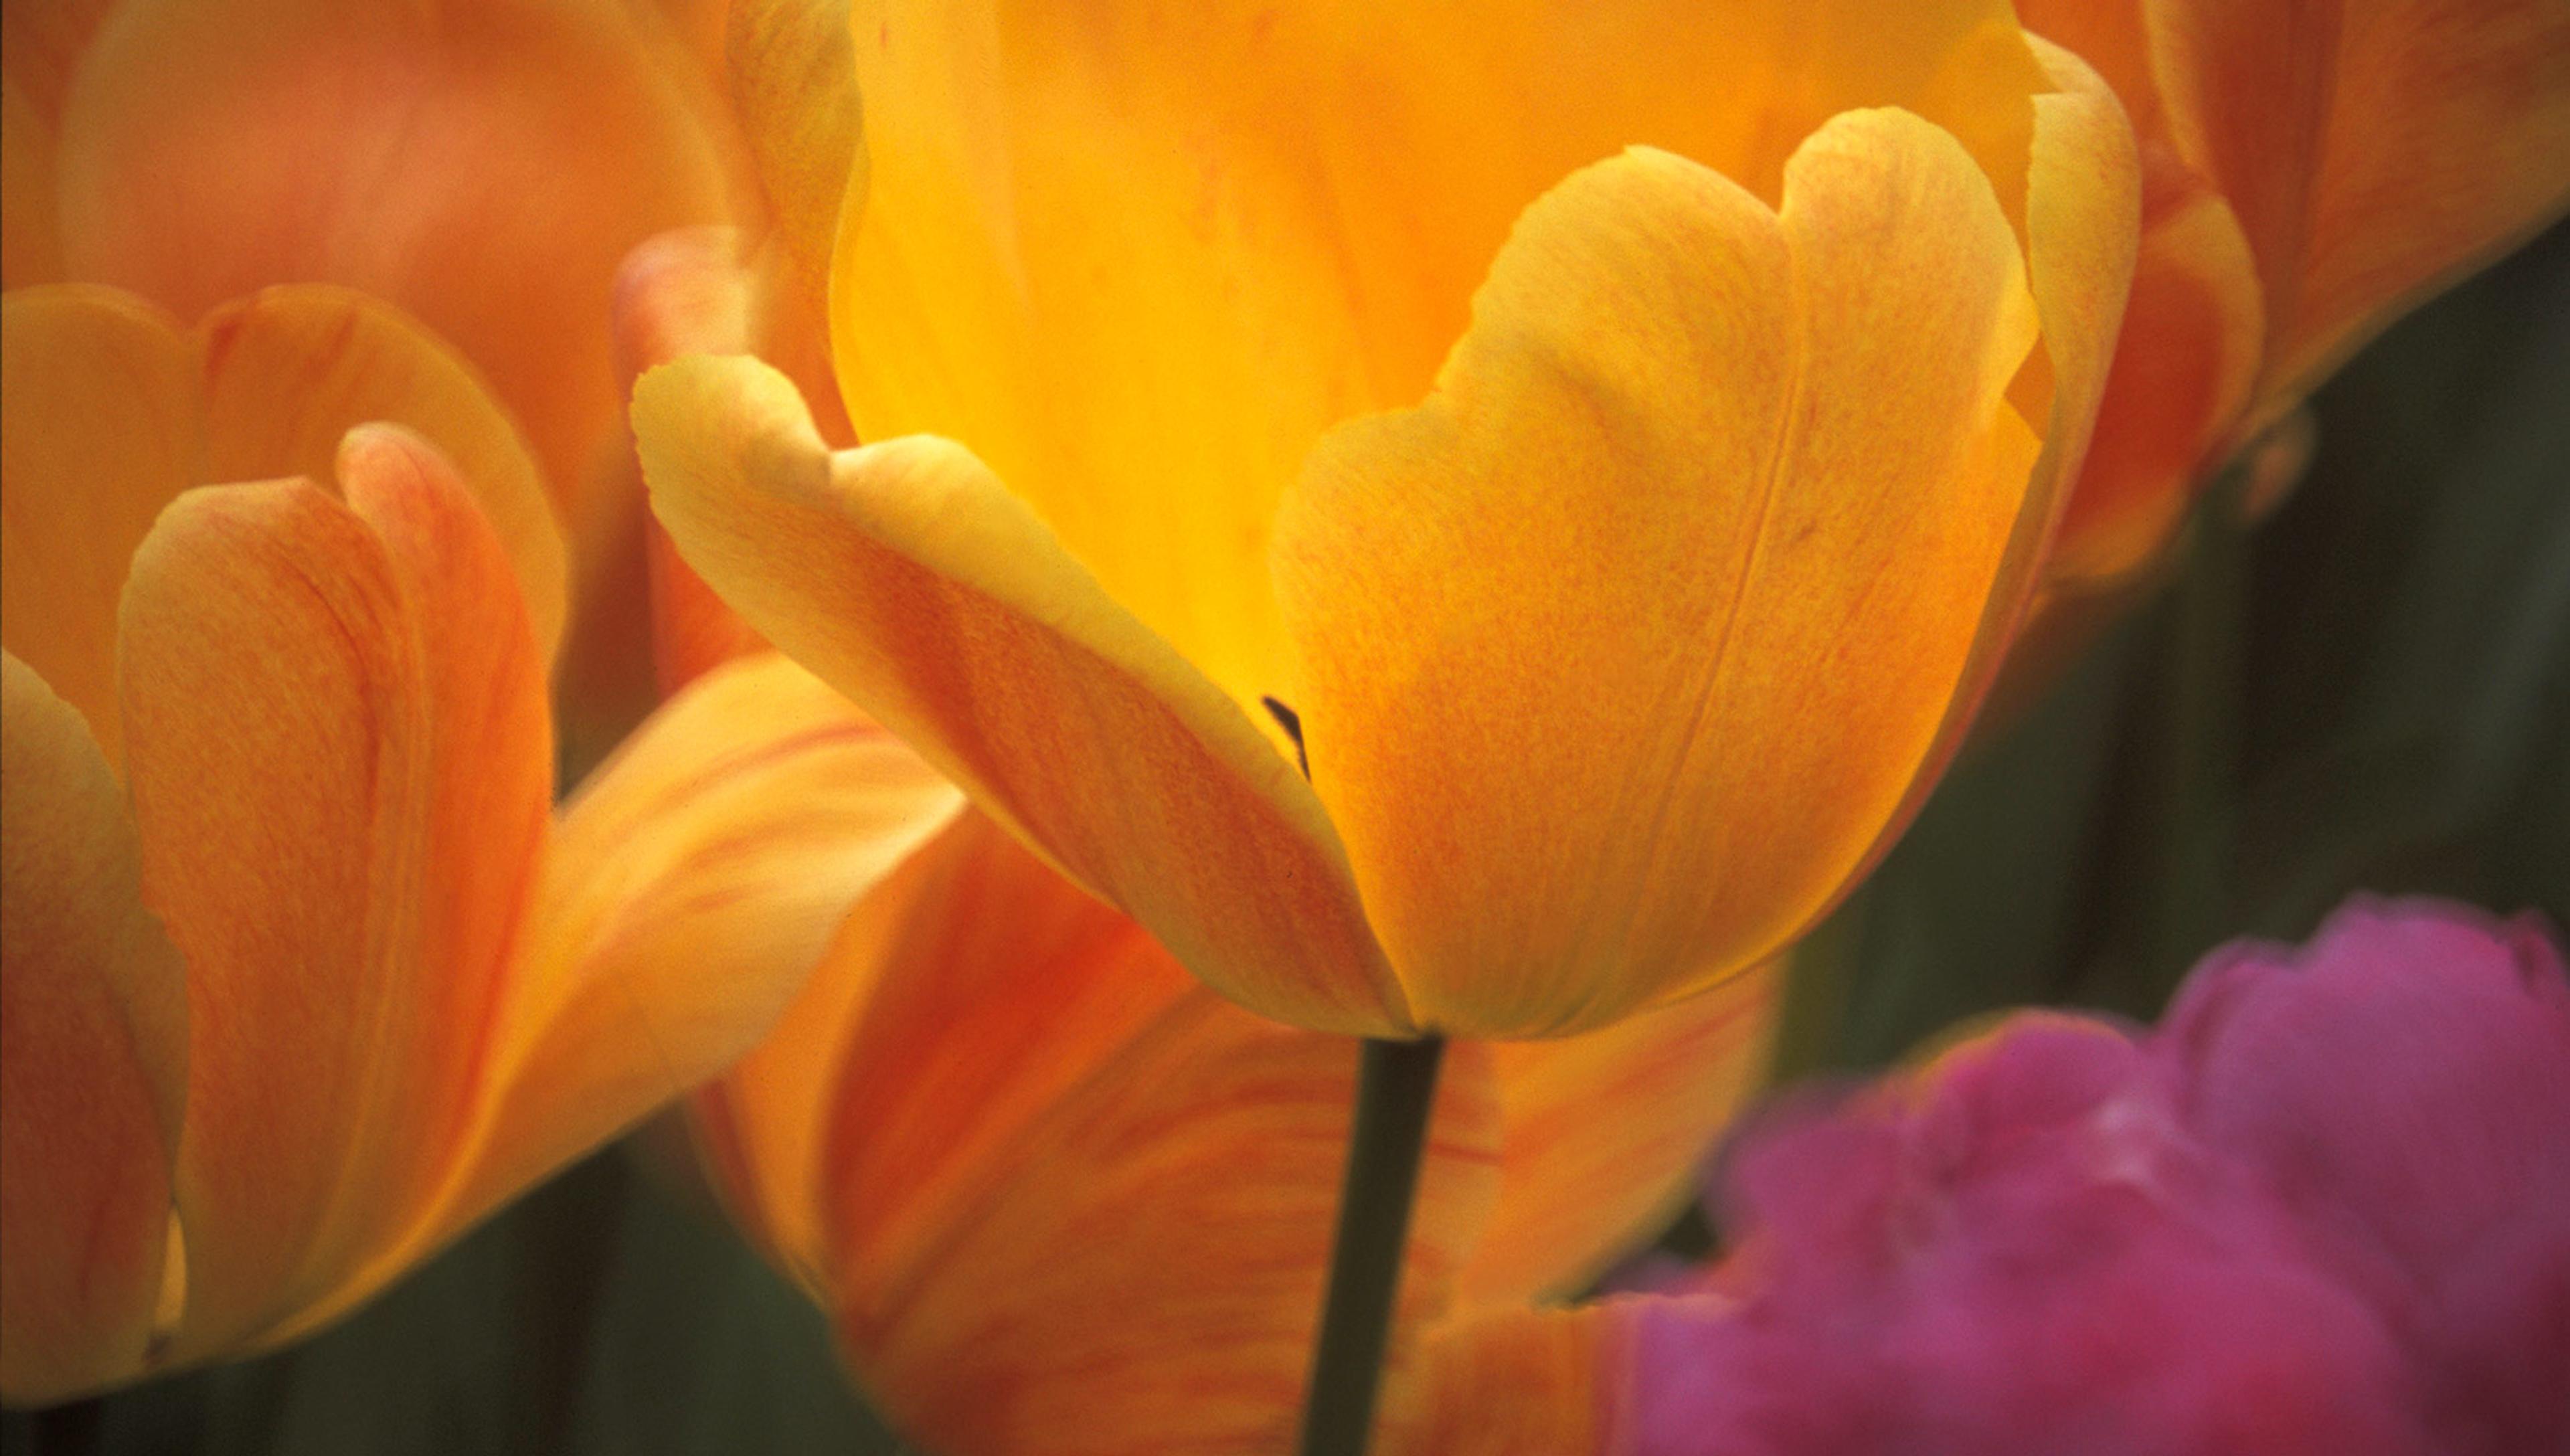 A close up of a vibrant yellow-gold tulip flower